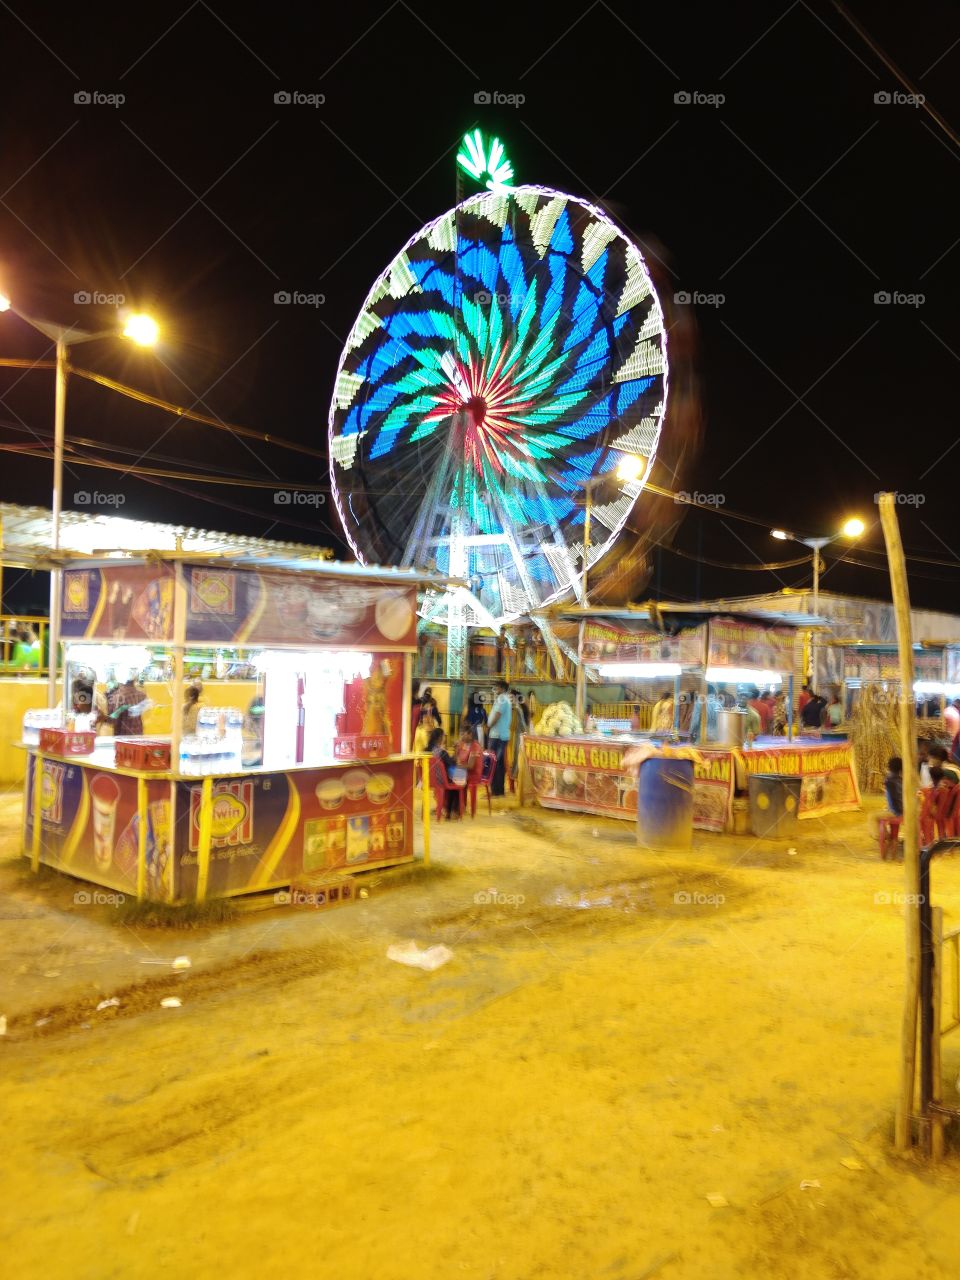 giant wheel in a fare and stalls around for food and refreshment. family and friends enjoyment place. children love rides and eating here.